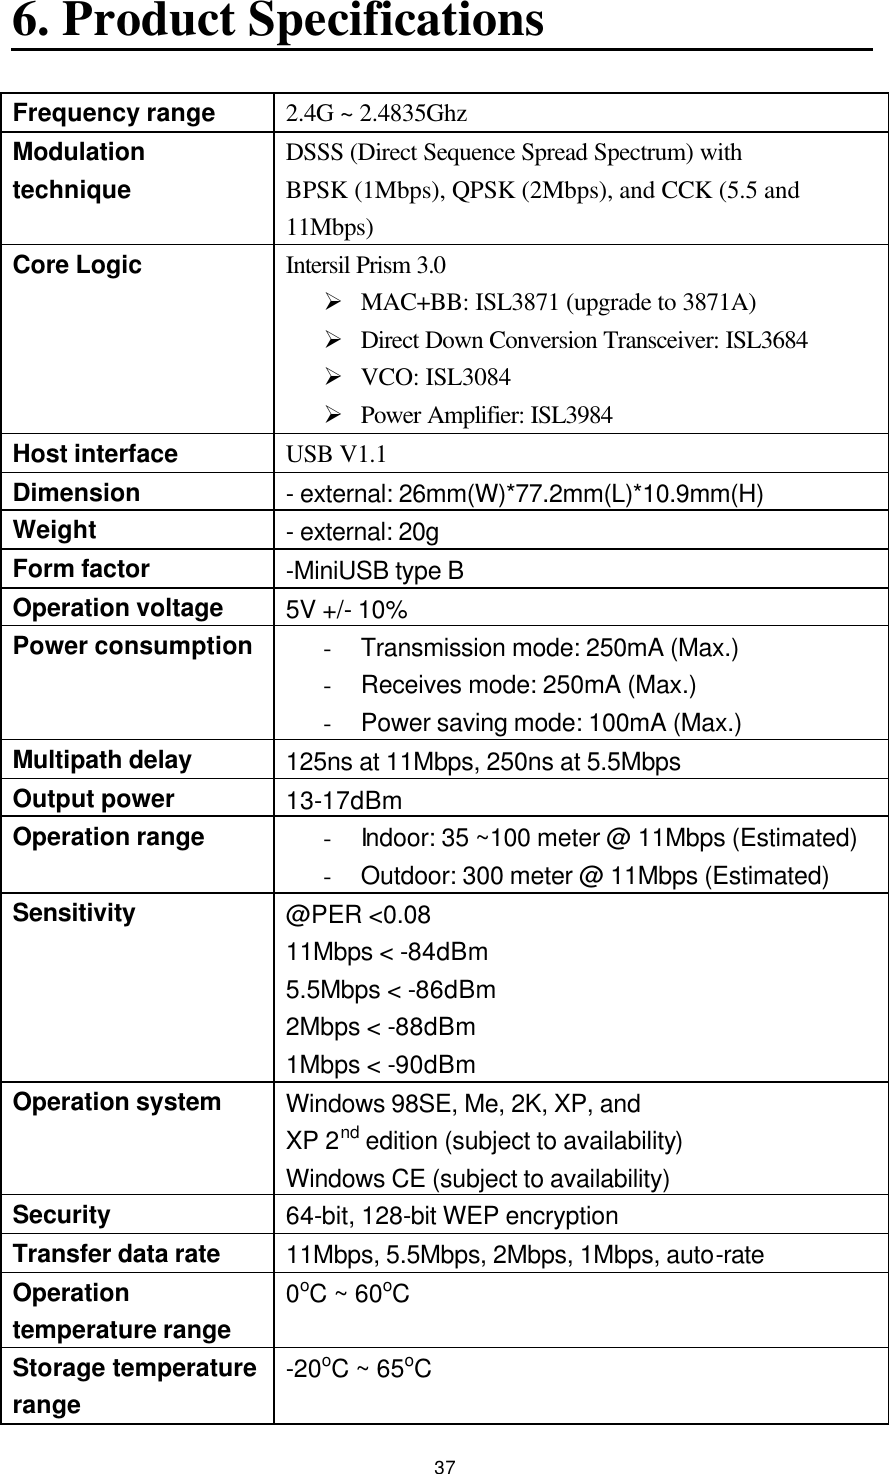  37 6. Product Specifications  Frequency range 2.4G ~ 2.4835Ghz Modulation technique DSSS (Direct Sequence Spread Spectrum) with BPSK (1Mbps), QPSK (2Mbps), and CCK (5.5 and 11Mbps) Core Logic Intersil Prism 3.0 Ø MAC+BB: ISL3871 (upgrade to 3871A) Ø Direct Down Conversion Transceiver: ISL3684 Ø VCO: ISL3084 Ø Power Amplifier: ISL3984 Host interface USB V1.1   Dimension - external: 26mm(W)*77.2mm(L)*10.9mm(H) Weight - external: 20g Form factor -MiniUSB type B Operation voltage 5V +/- 10% Power consumption - Transmission mode: 250mA (Max.) - Receives mode: 250mA (Max.) - Power saving mode: 100mA (Max.) Multipath delay 125ns at 11Mbps, 250ns at 5.5Mbps Output power 13-17dBm Operation range - Indoor: 35 ~100 meter @ 11Mbps (Estimated) - Outdoor: 300 meter @ 11Mbps (Estimated) Sensitivity @PER &lt;0.08 11Mbps &lt; -84dBm 5.5Mbps &lt; -86dBm 2Mbps &lt; -88dBm 1Mbps &lt; -90dBm Operation system Windows 98SE, Me, 2K, XP, and XP 2nd edition (subject to availability) Windows CE (subject to availability) Security 64-bit, 128-bit WEP encryption   Transfer data rate 11Mbps, 5.5Mbps, 2Mbps, 1Mbps, auto-rate Operation temperature range 0oC ~ 60oC Storage temperature range -20oC ~ 65oC 